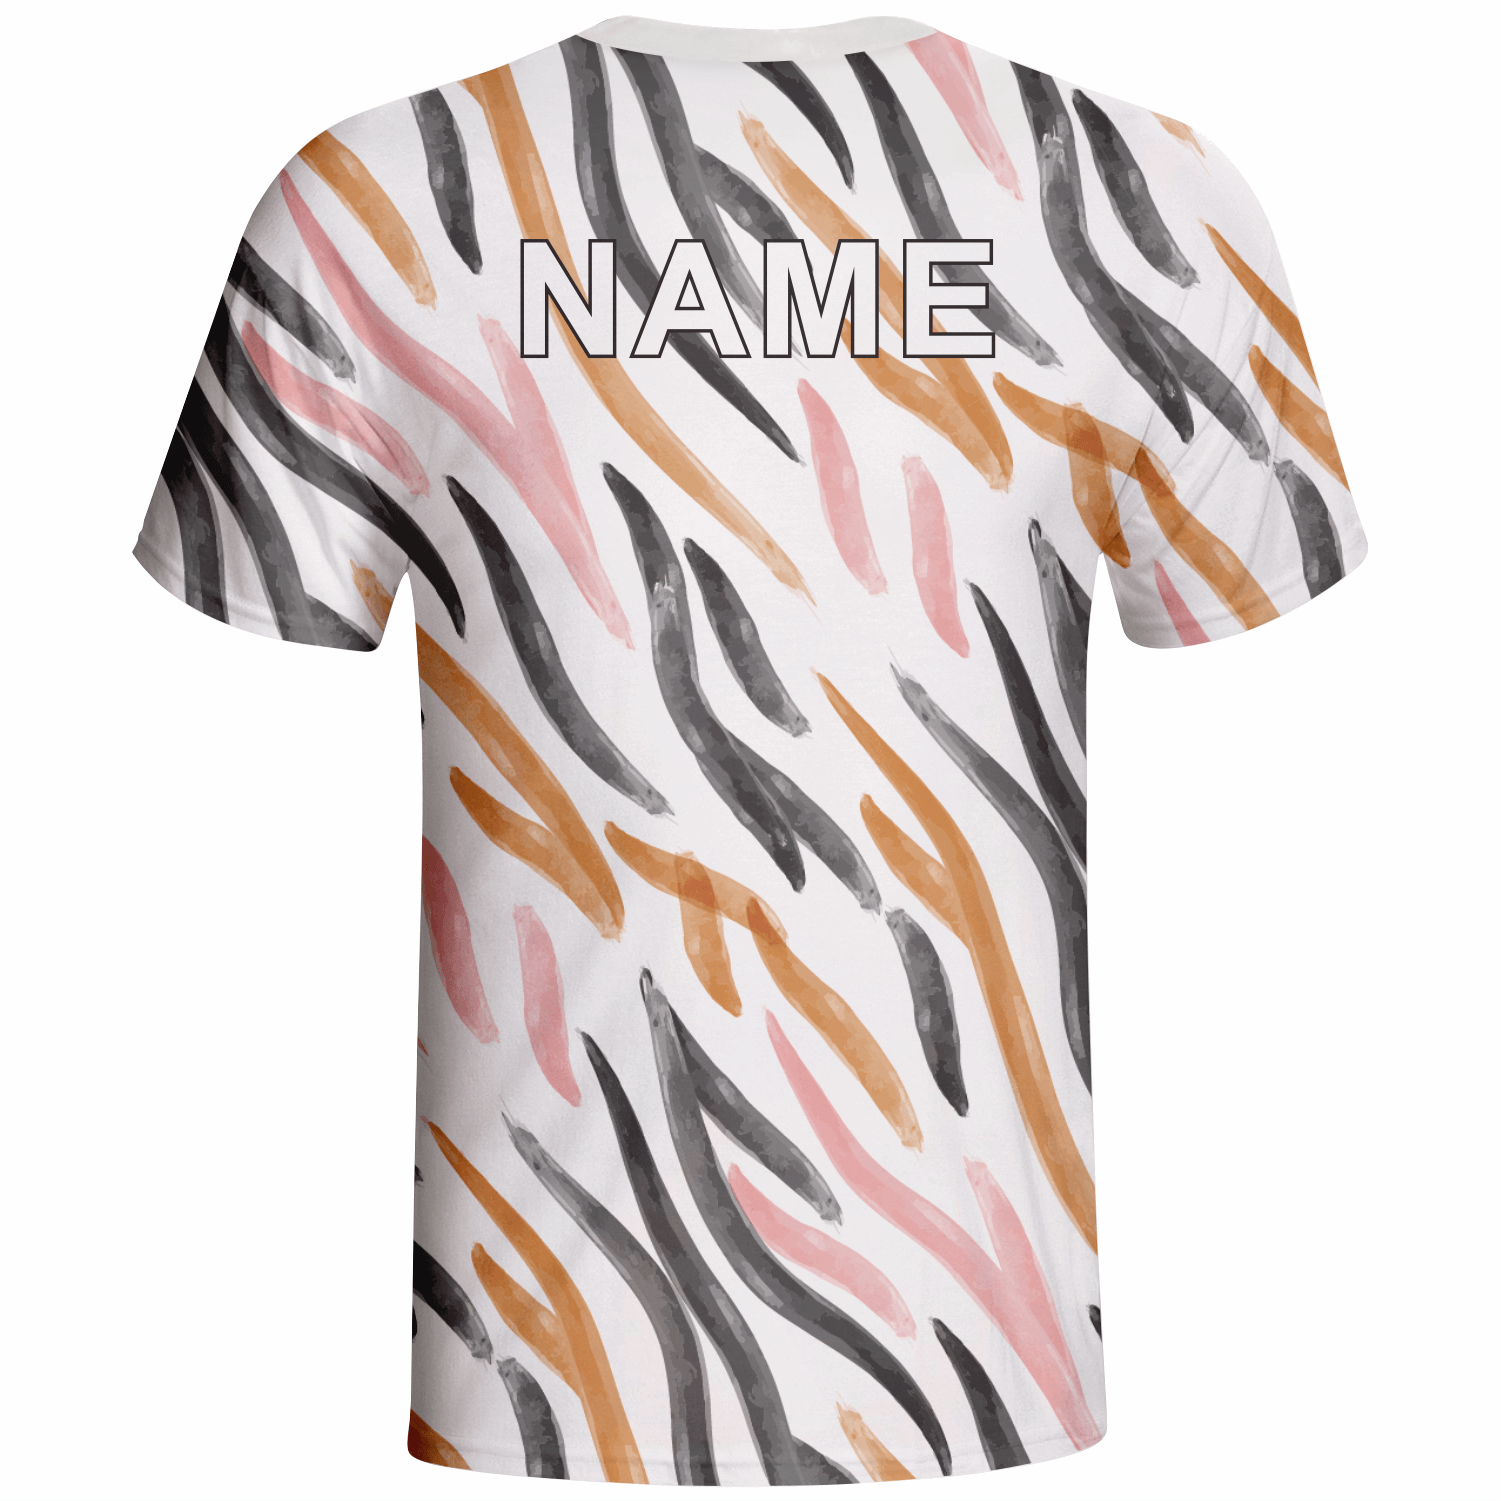 2022 Sublimated 100% Polyester Good Quality Tee of Round Neck